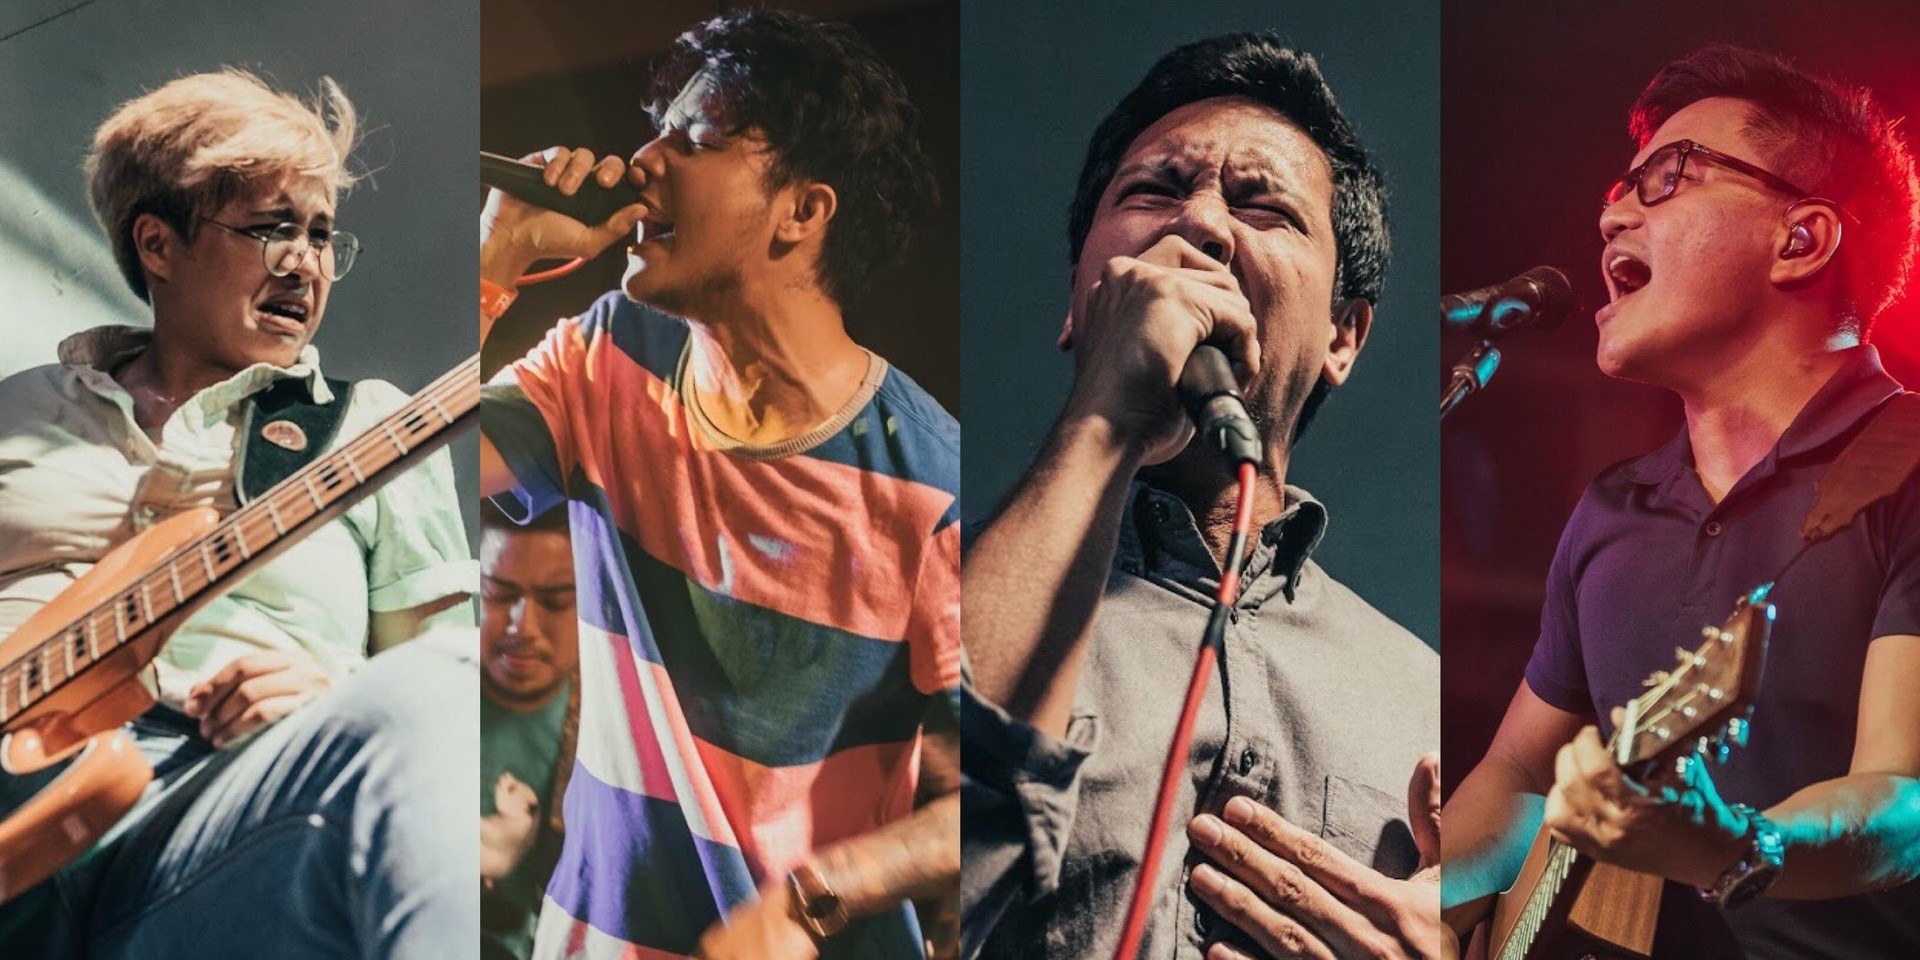 Red Ninja celebrates 9th birthday with Dicta License, Ebe Dancel, and more – photo gallery